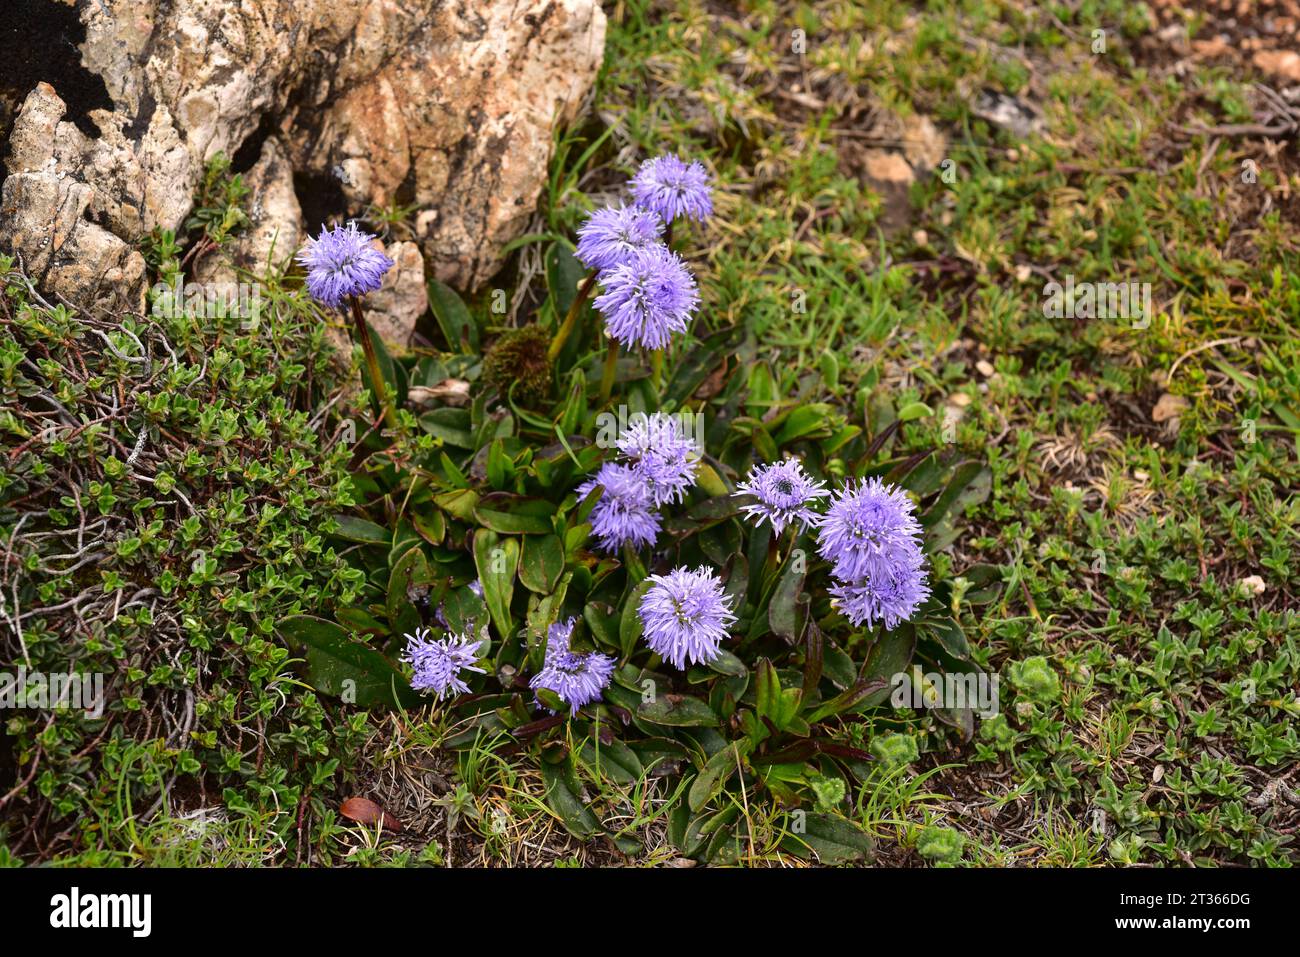 Globularia nudicaulis is a perennial herb native to mountains of southwestern Europe (Alps, Pyrenees and Cantabrian Mountains). This photo was take in Stock Photo